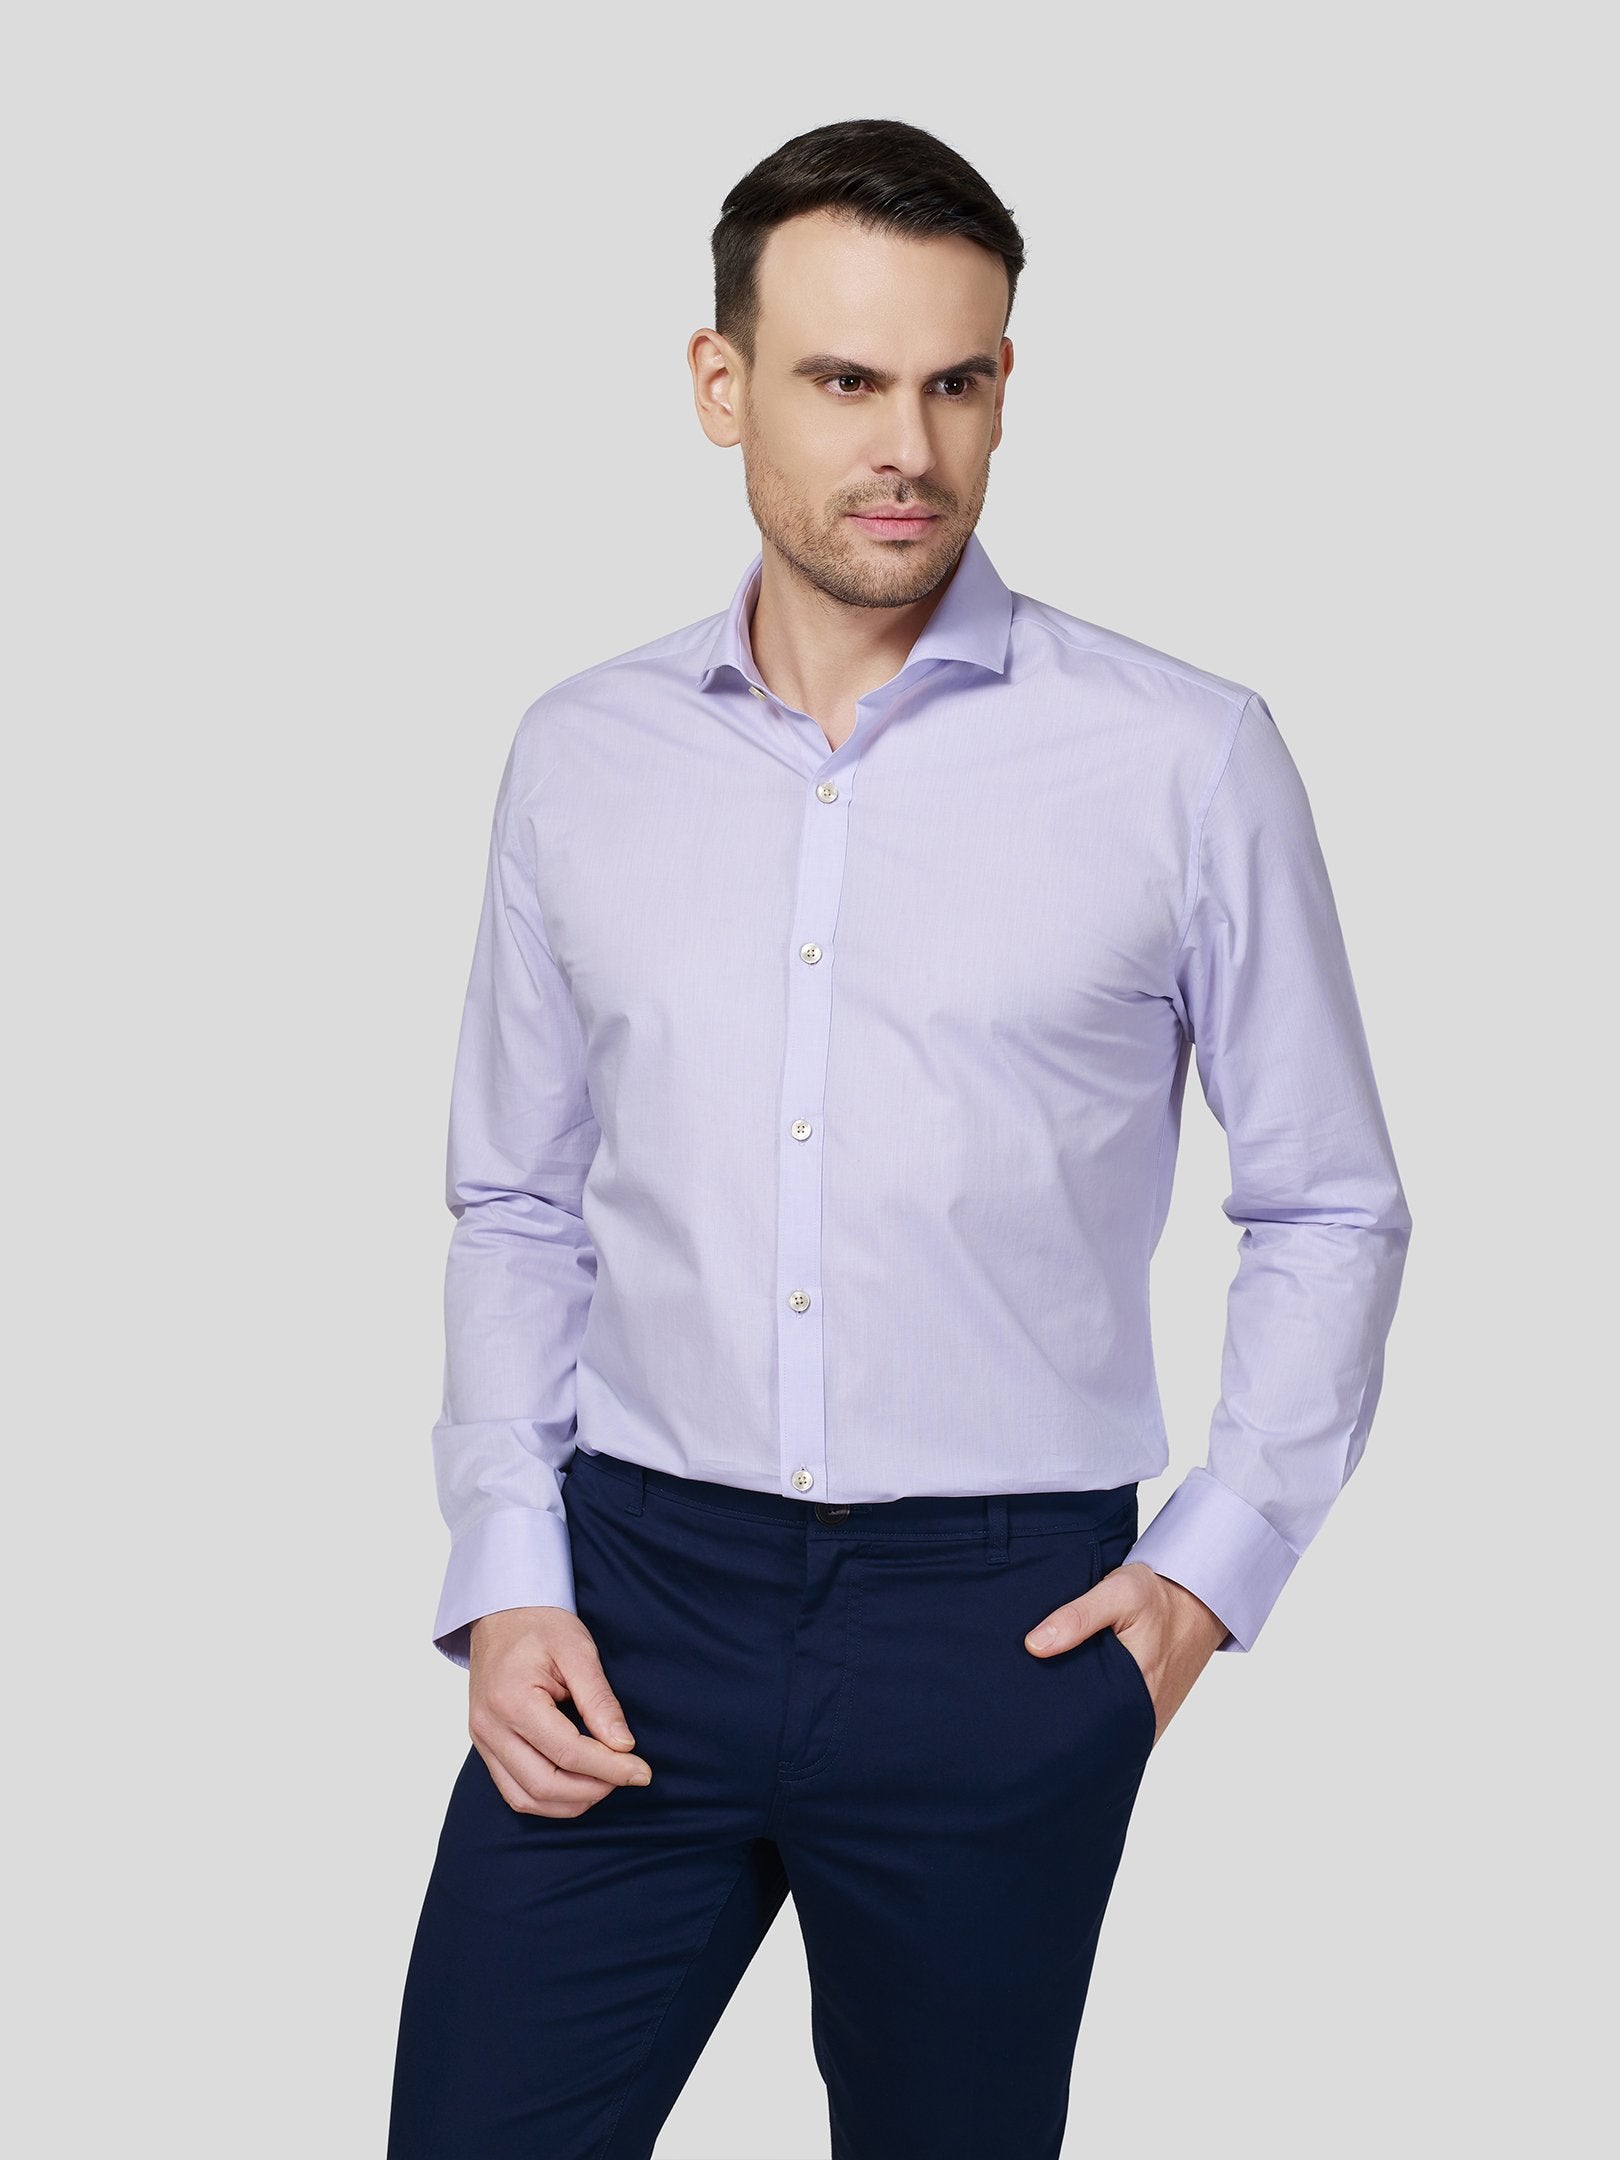 Cut Way Collar Shirt With Contrast Piping Detail - Zest Mélange 